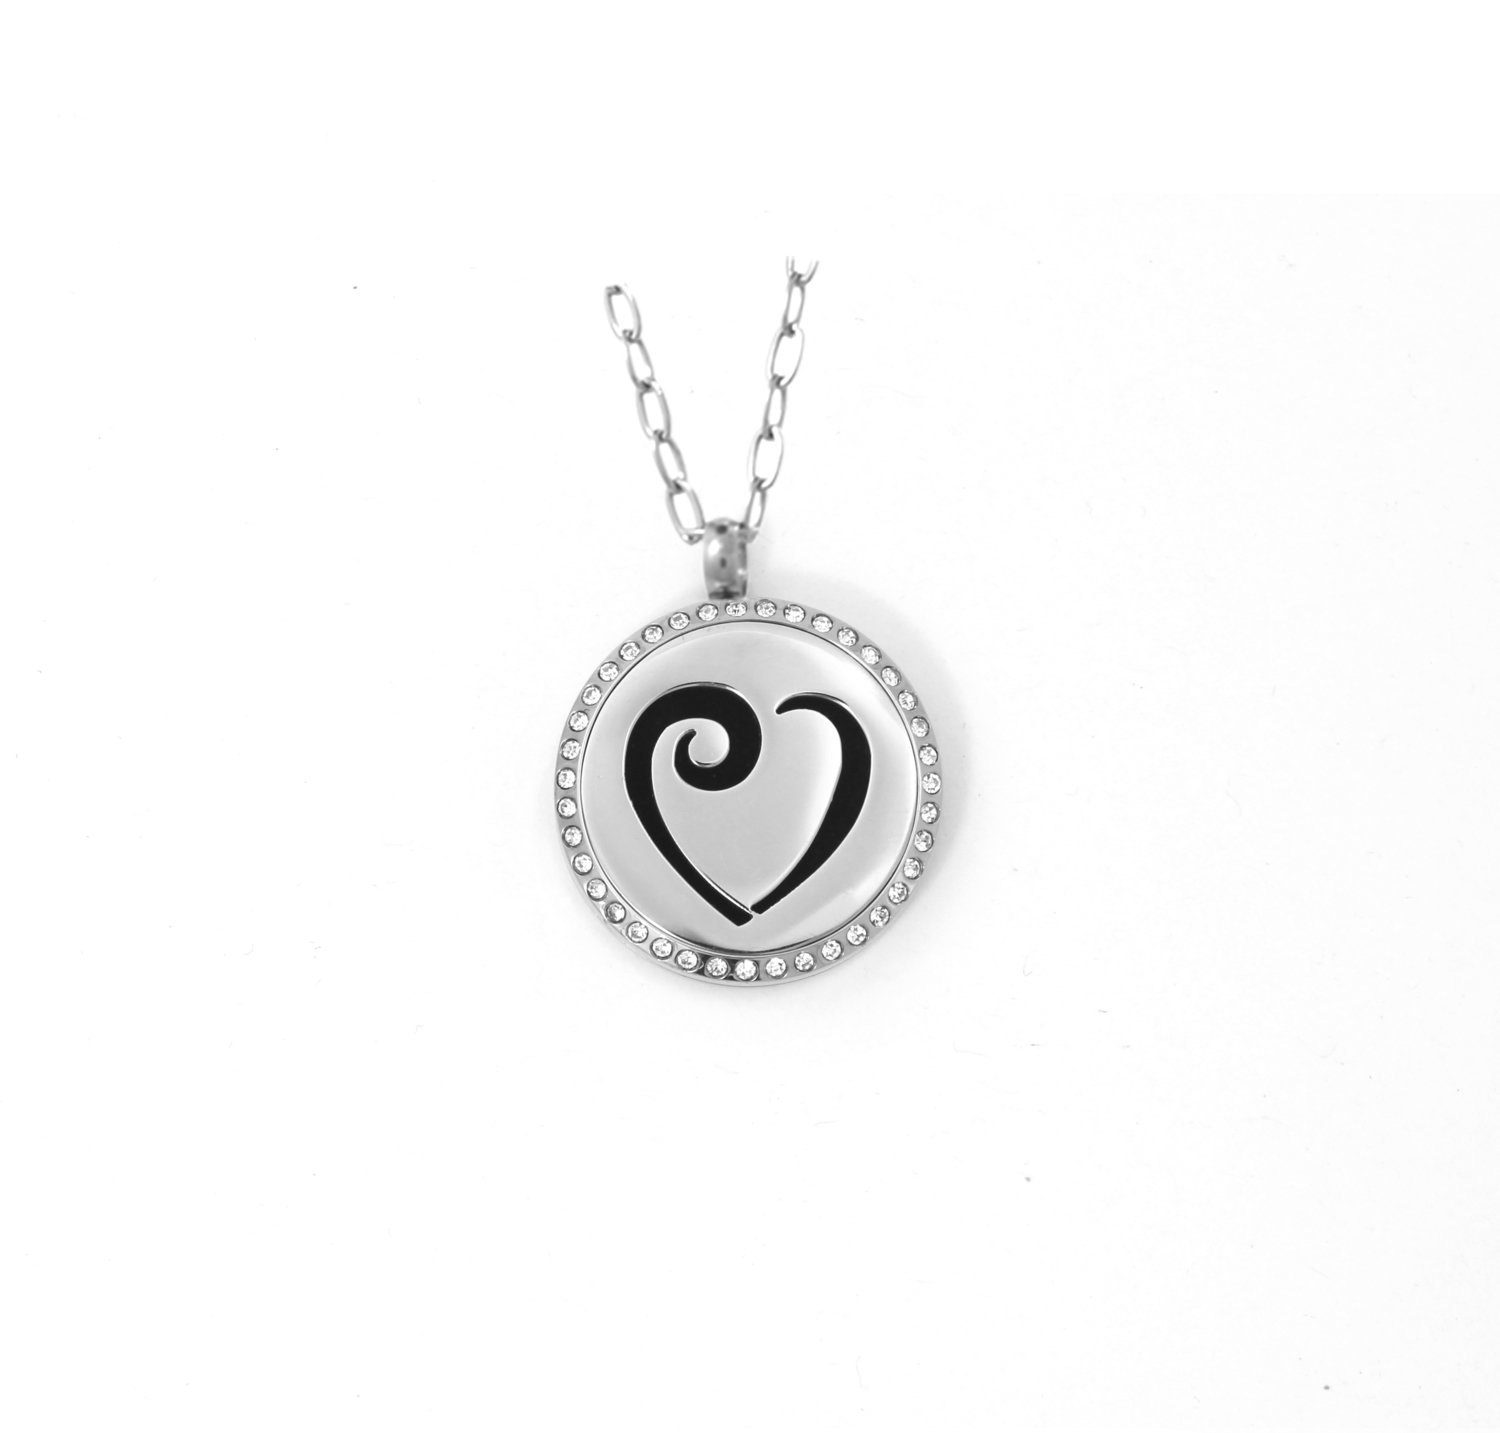 Diffusing Magnetic Heart Pendant with Crystals - includes Two Leather Inserts